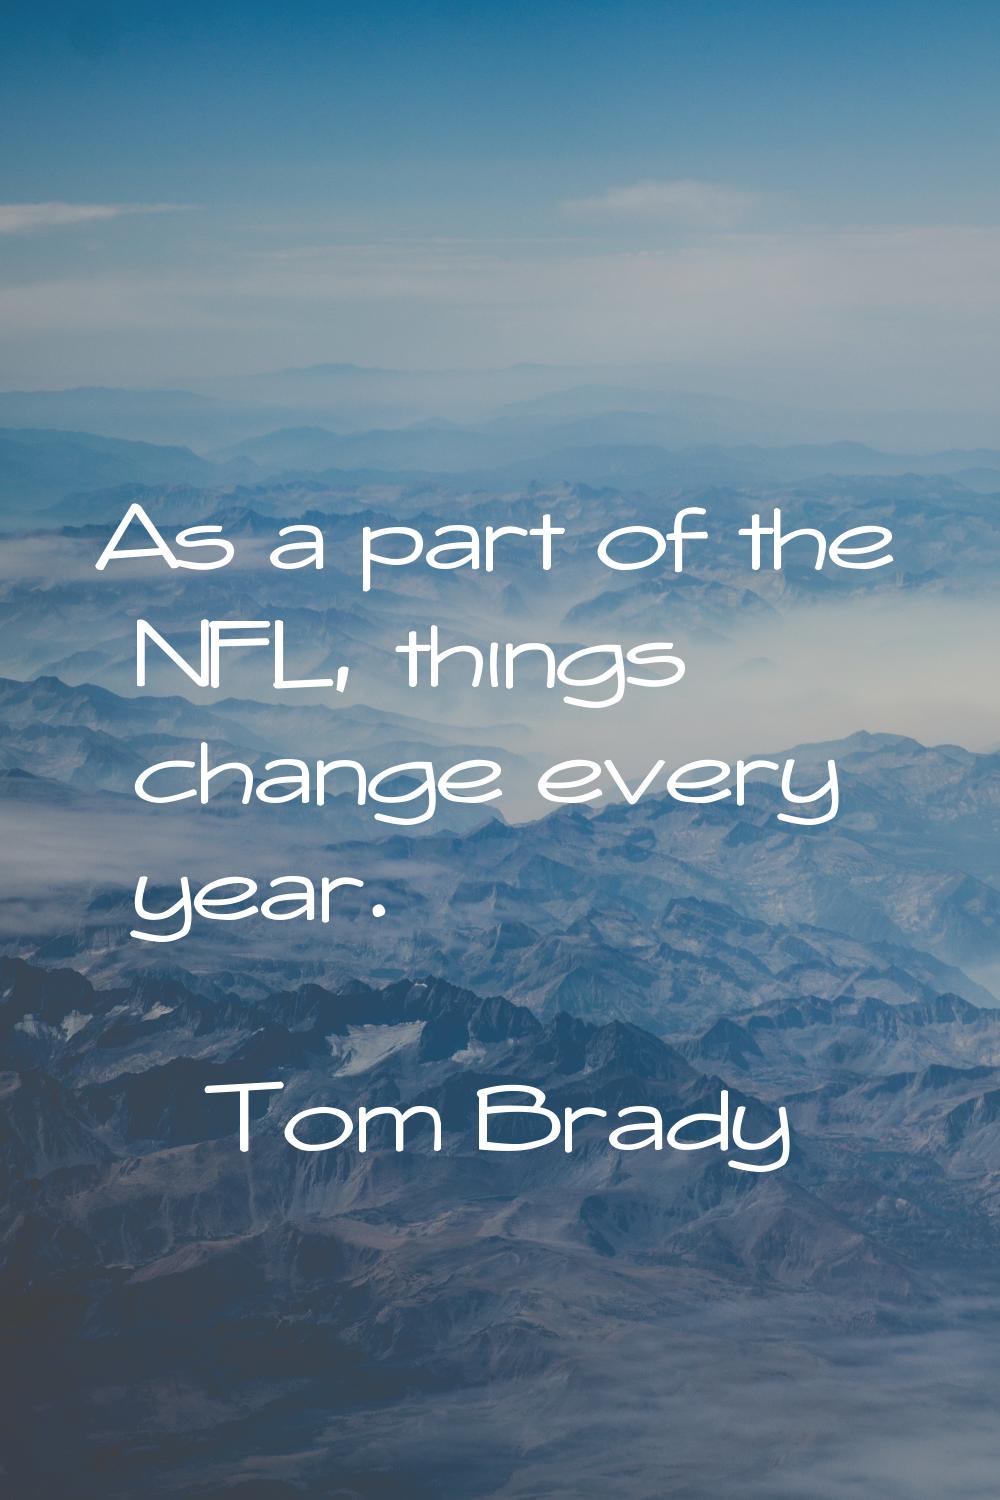 As a part of the NFL, things change every year.